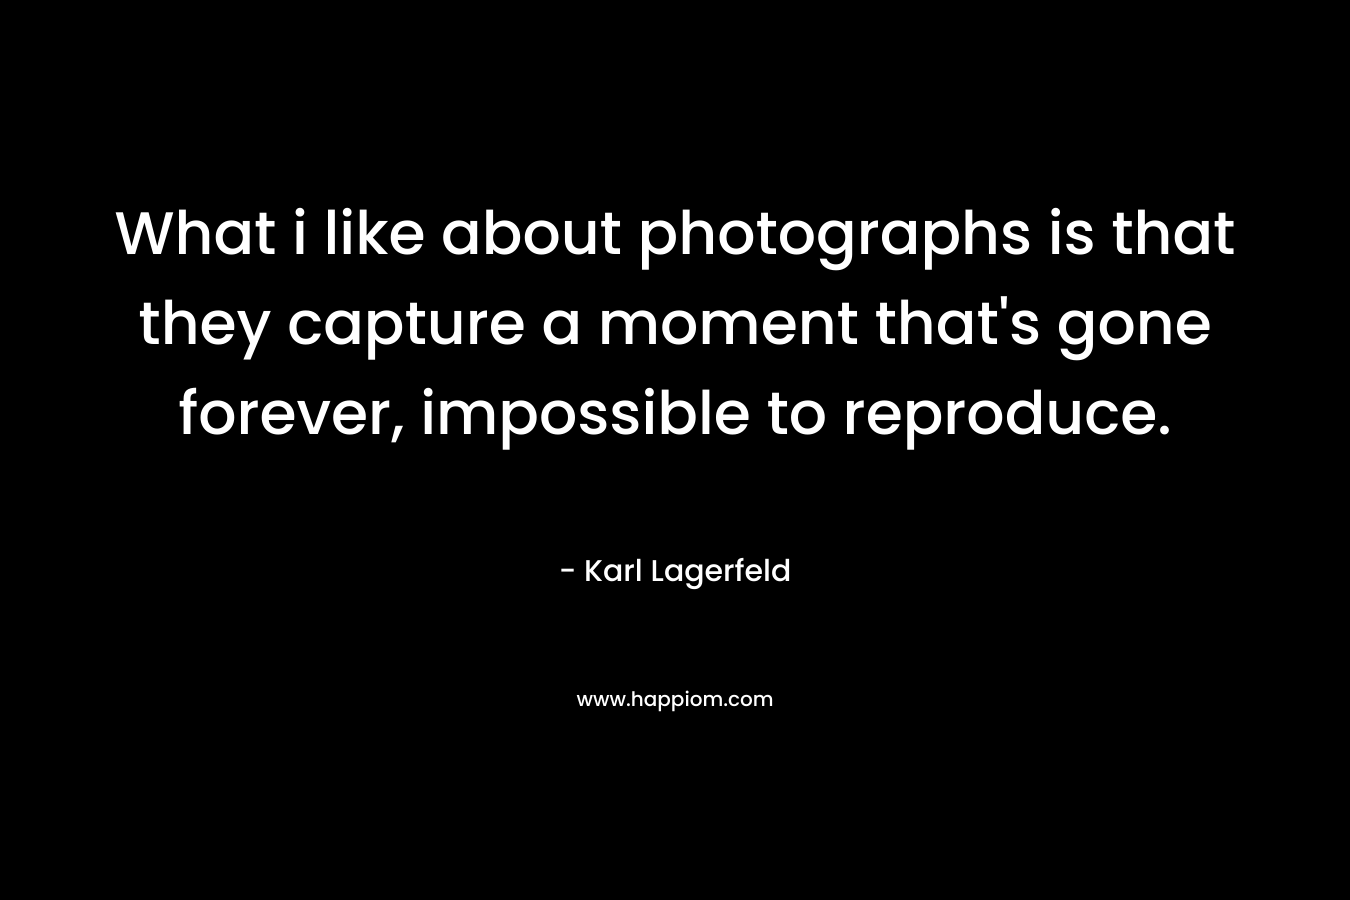 What i like about photographs is that they capture a moment that's gone forever, impossible to reproduce.